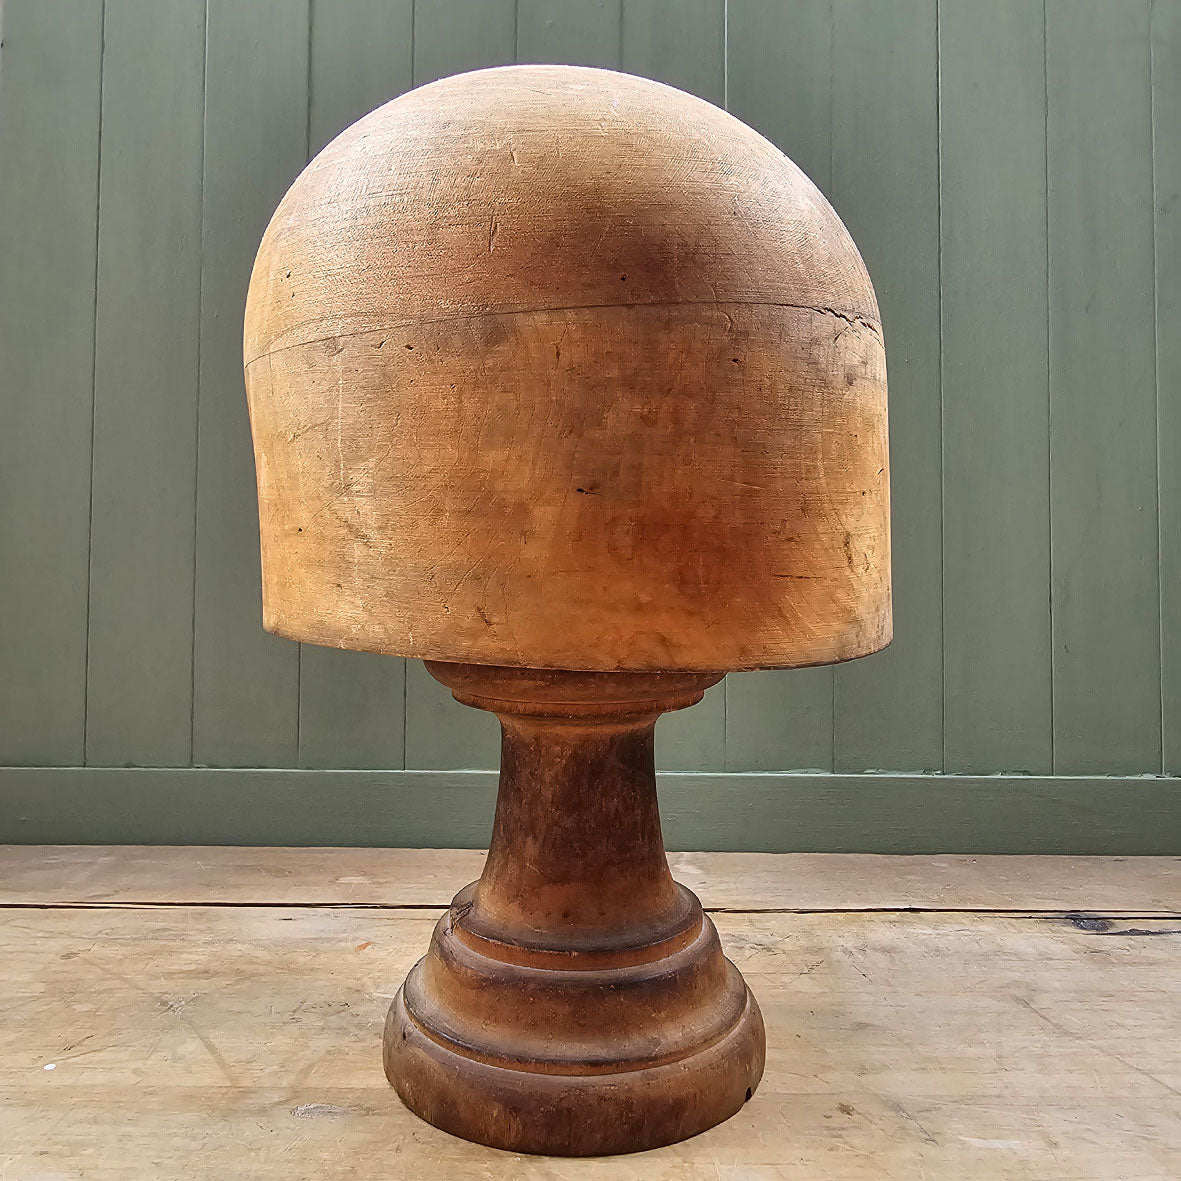 A Milliners Hat Block with its original stand is a real beauty. Perfectly aged with great colour. The perfect resting place for resting you hat or cap when not in use - SHOP NOW - www.intovintage.co.uk